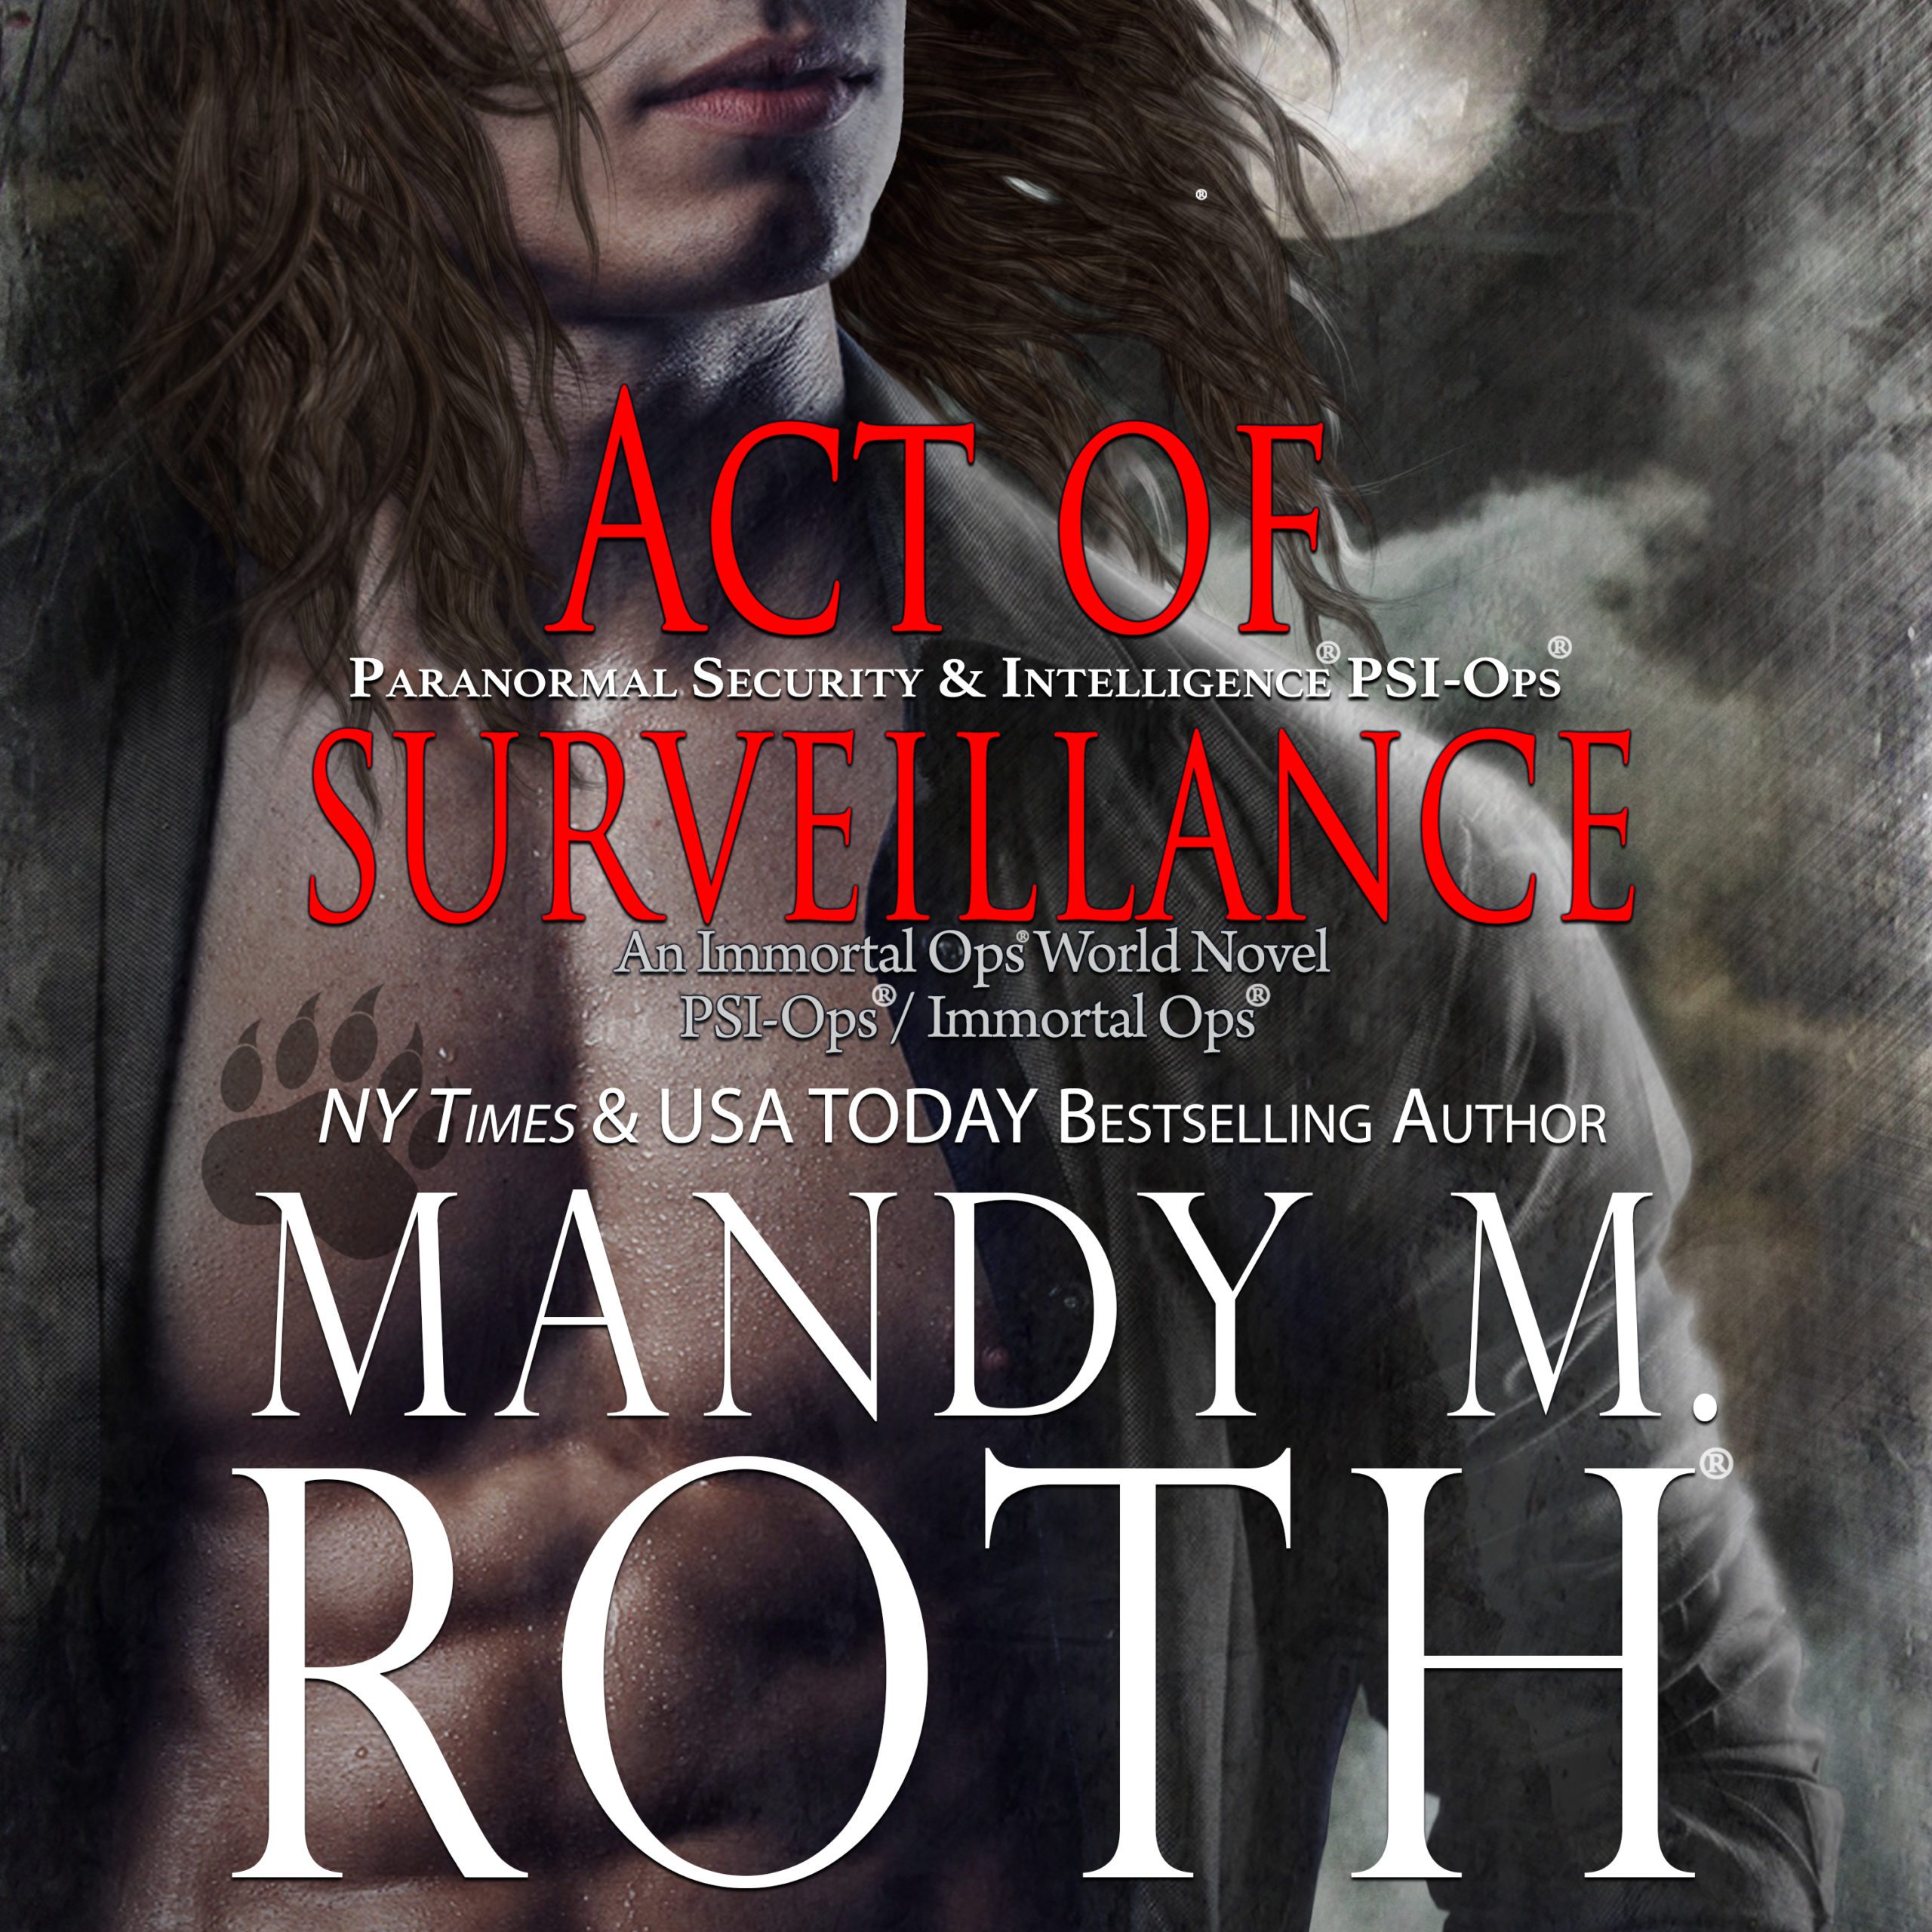 Audiobook Proofer for Act of Surveillance by Mandy M. Roth